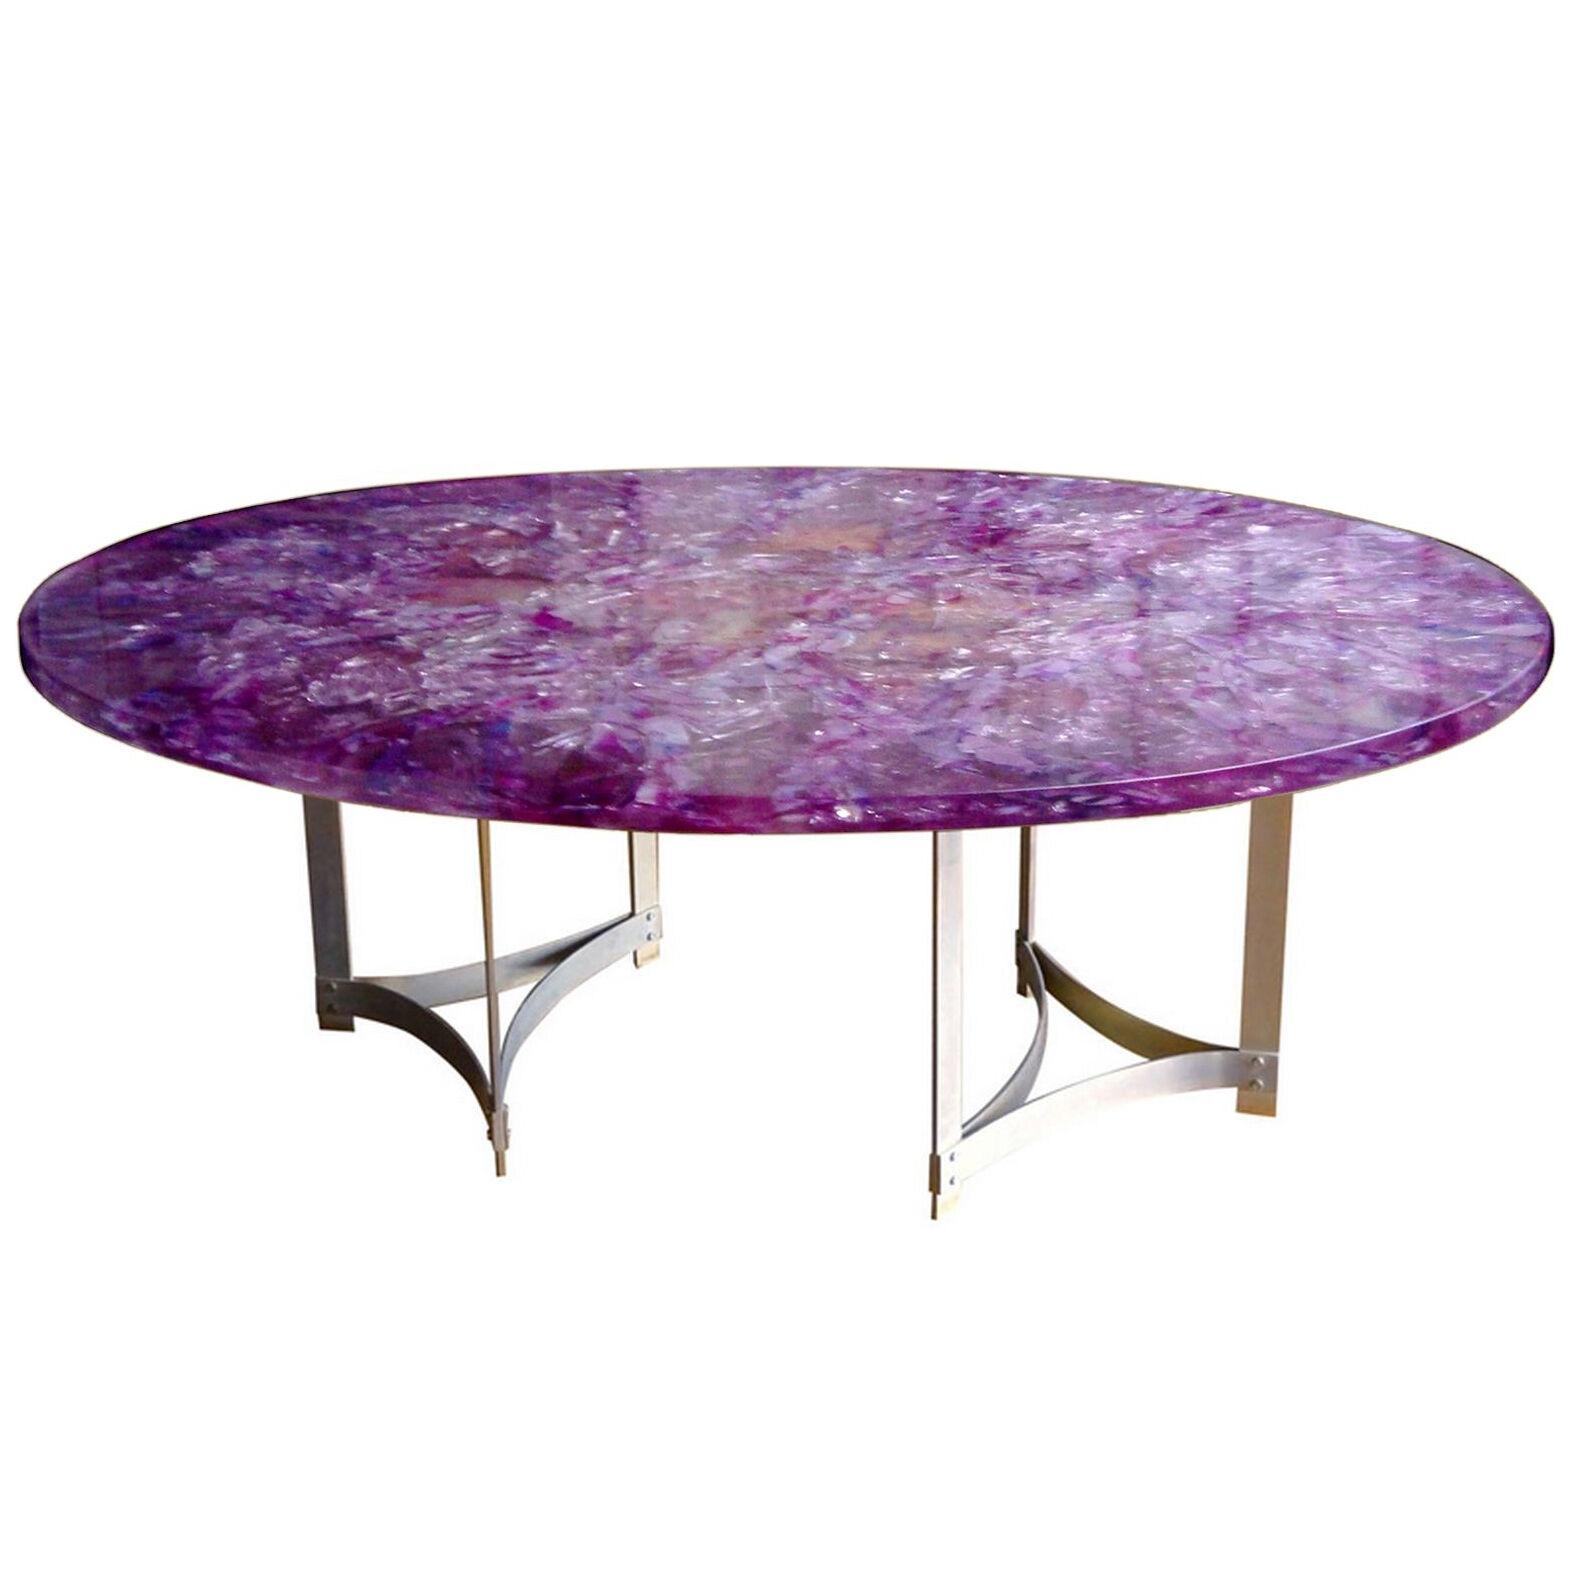 Large "Amethyst" table by Gilles Charbin